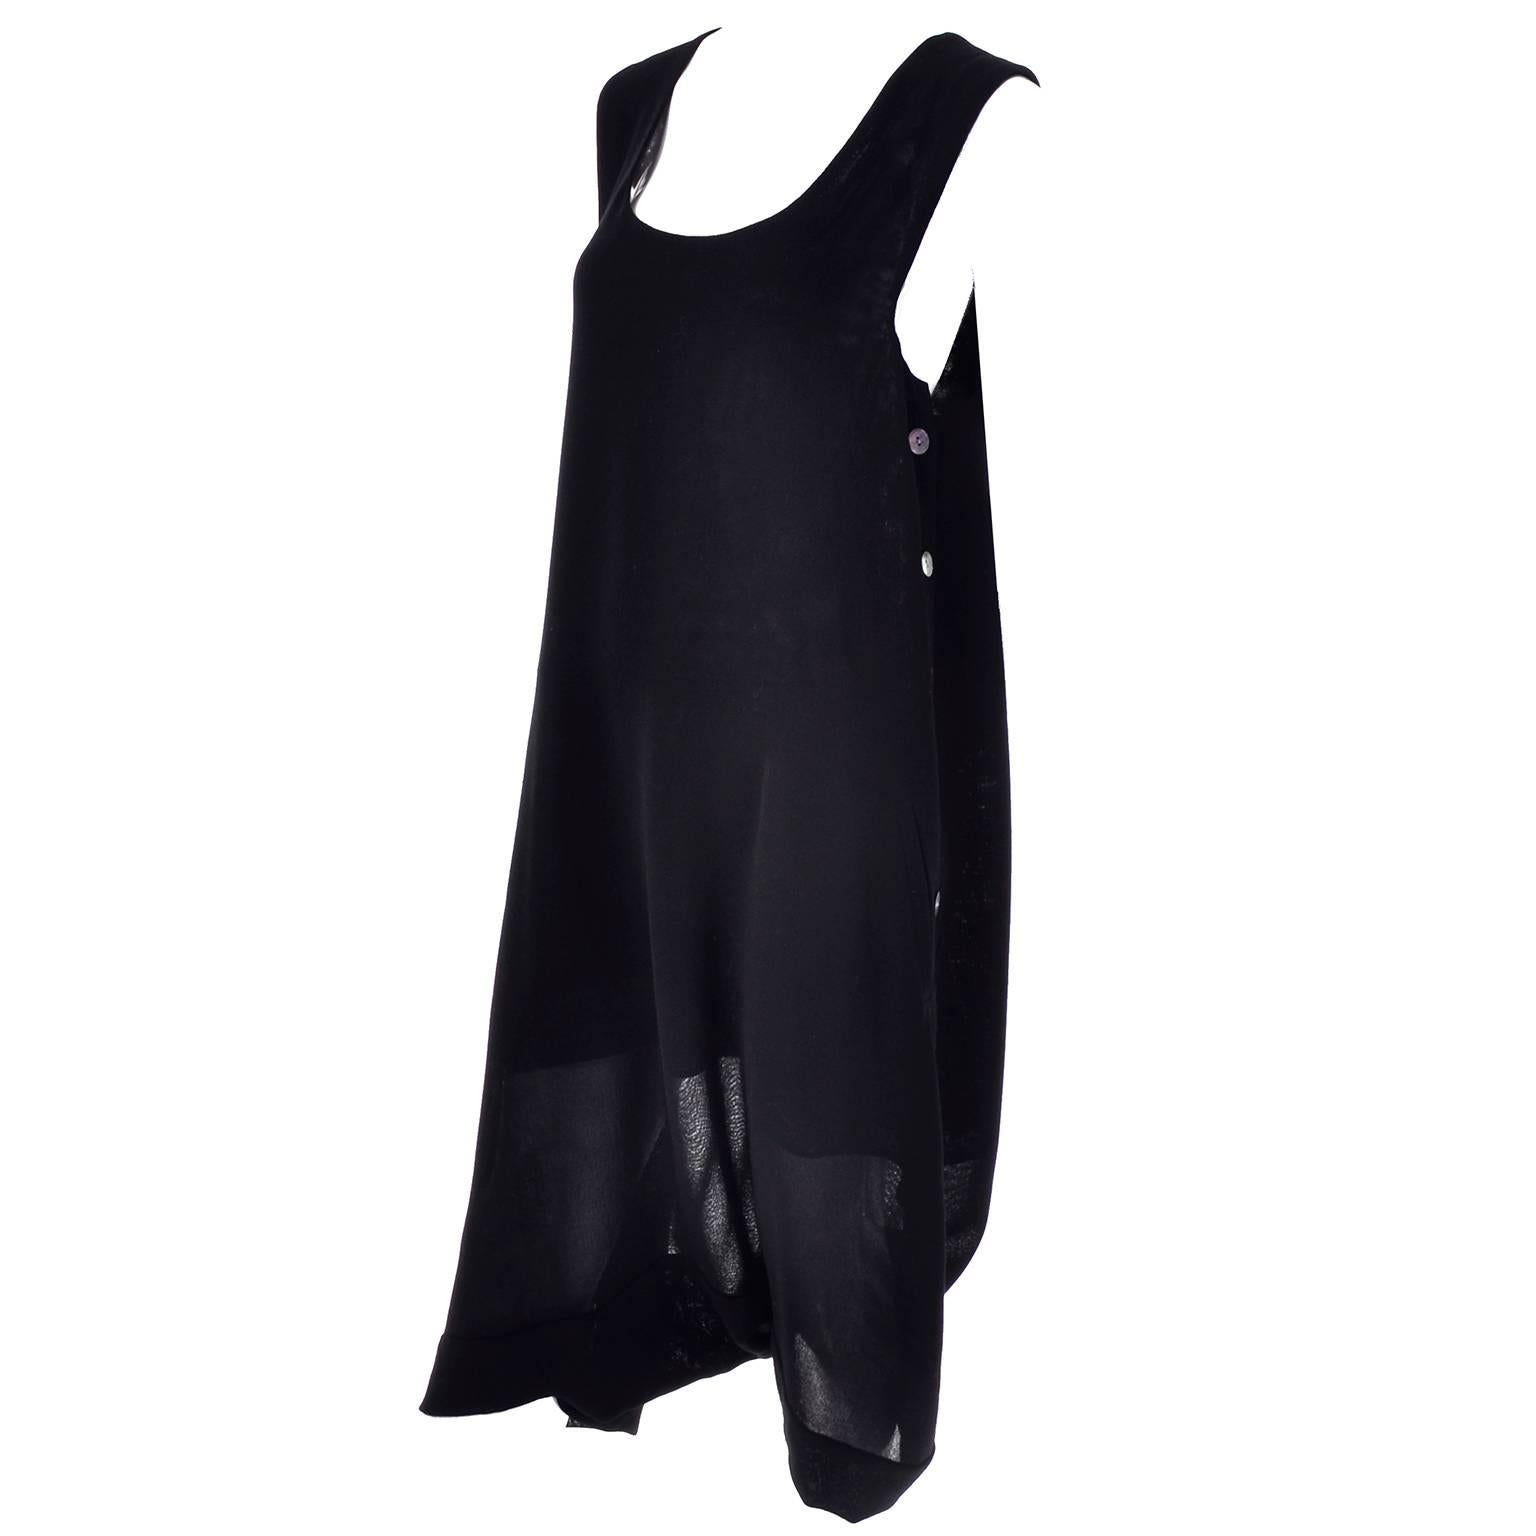 This outstanding vintage romper dress is from Issey Miyake and is made in a lightweight black wool. The details are almost impossible to show in the photographs! This sleeveless romper has a deep drop crotch and a scoop neck. This gorgeous